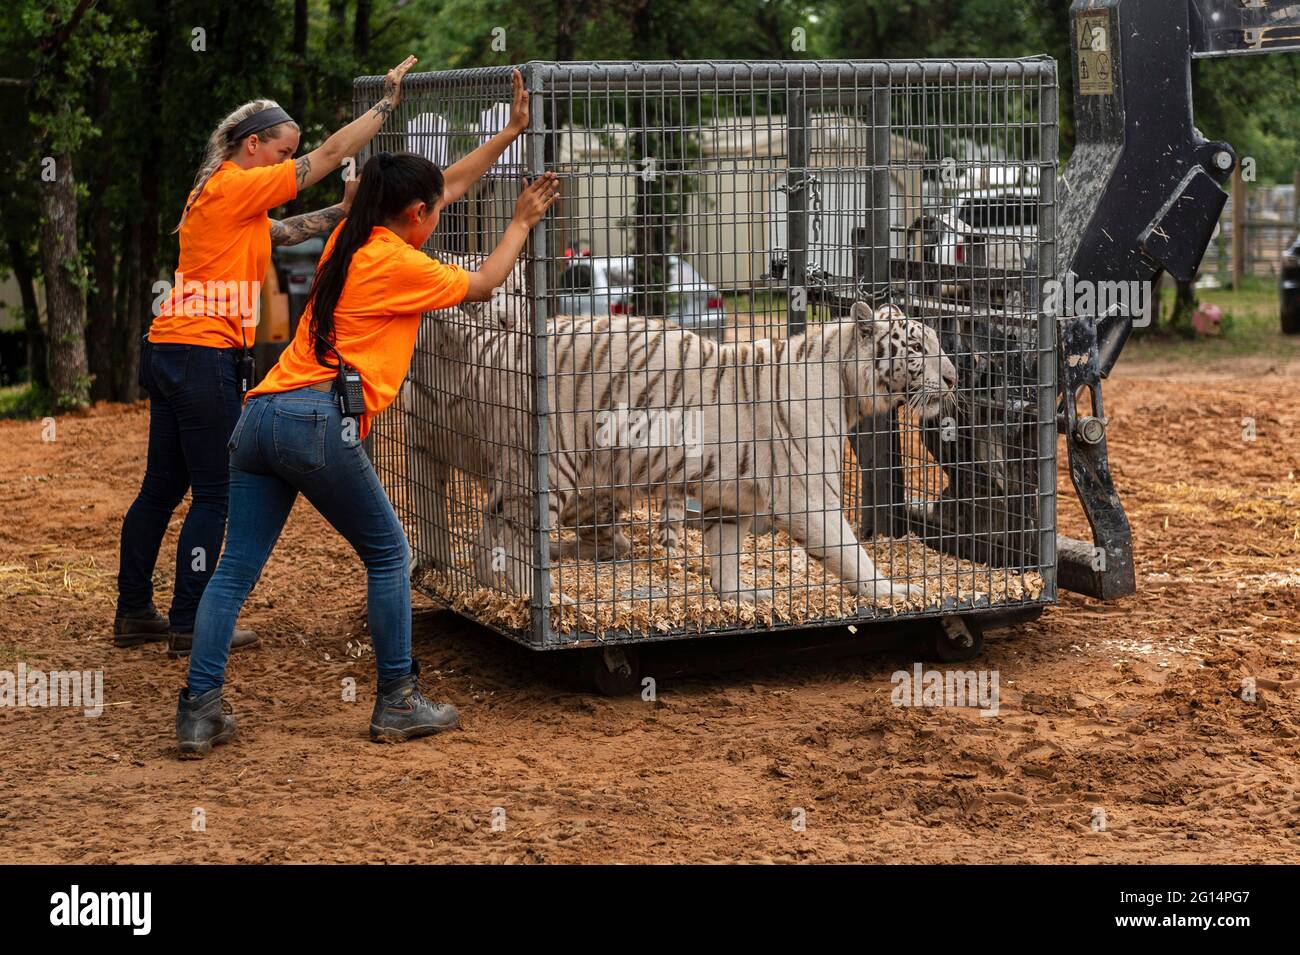 Workers move cages holding a white tiger as U.S. Marshals seize 68 protected lions, tigers, lion-tiger hybrids, and a jaguar from Jeffrey and Lauren Lowe Tiger King Park May 17, 2021 in Thackerville, Oklahoma. The park, formerly owned by the Tiger King, Joe Exotic, was seized for violating  the Endangered Species Act. Stock Photo